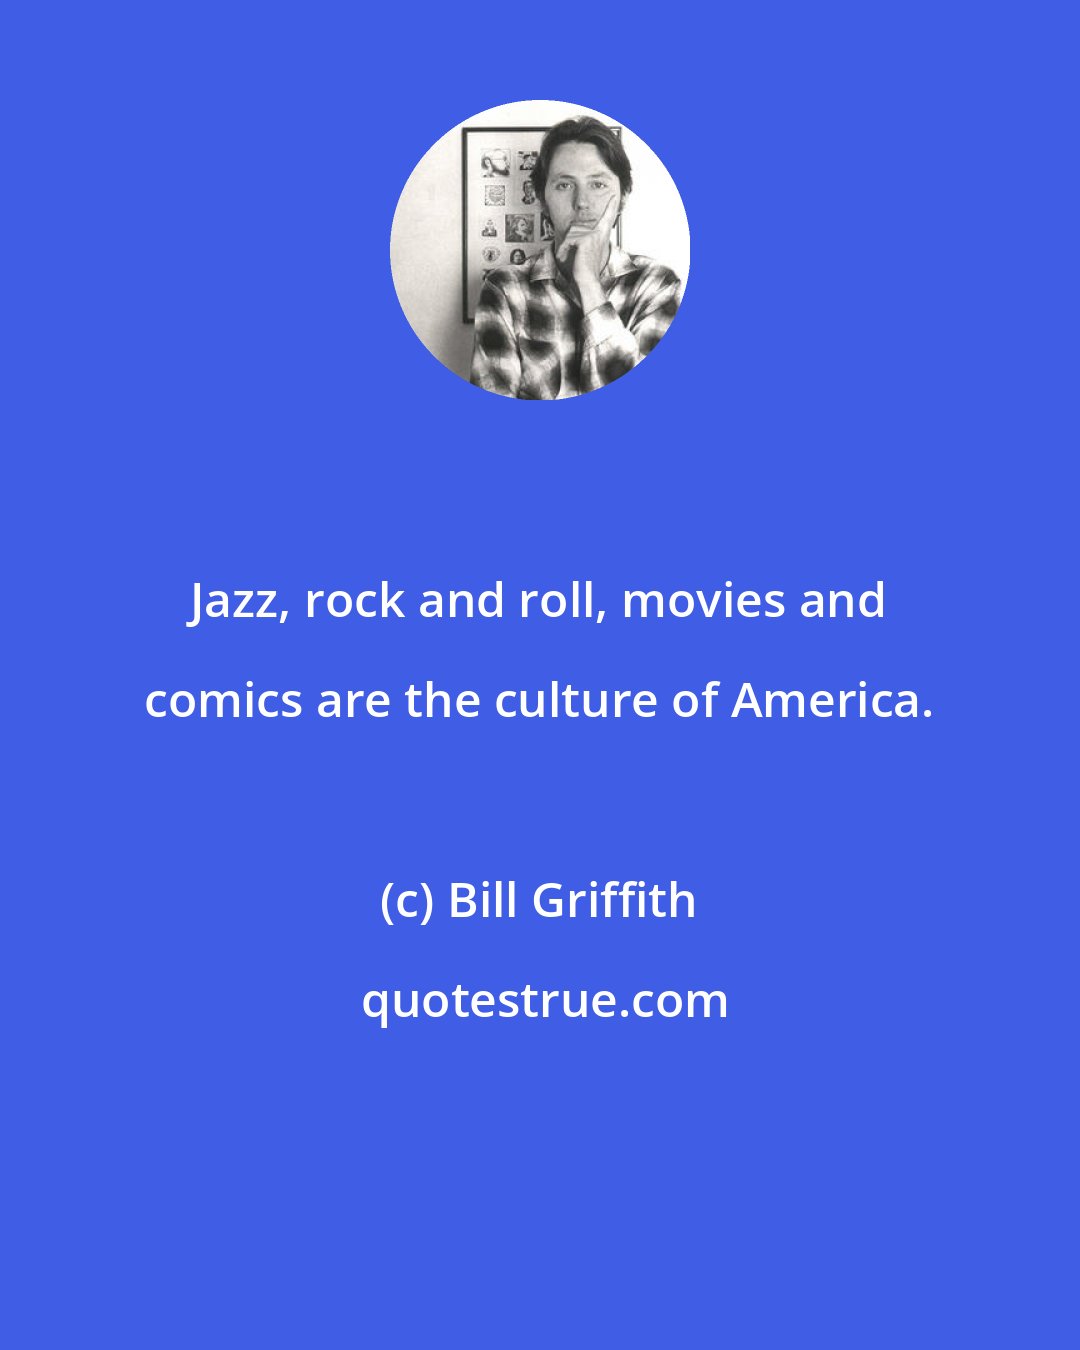 Bill Griffith: Jazz, rock and roll, movies and comics are the culture of America.